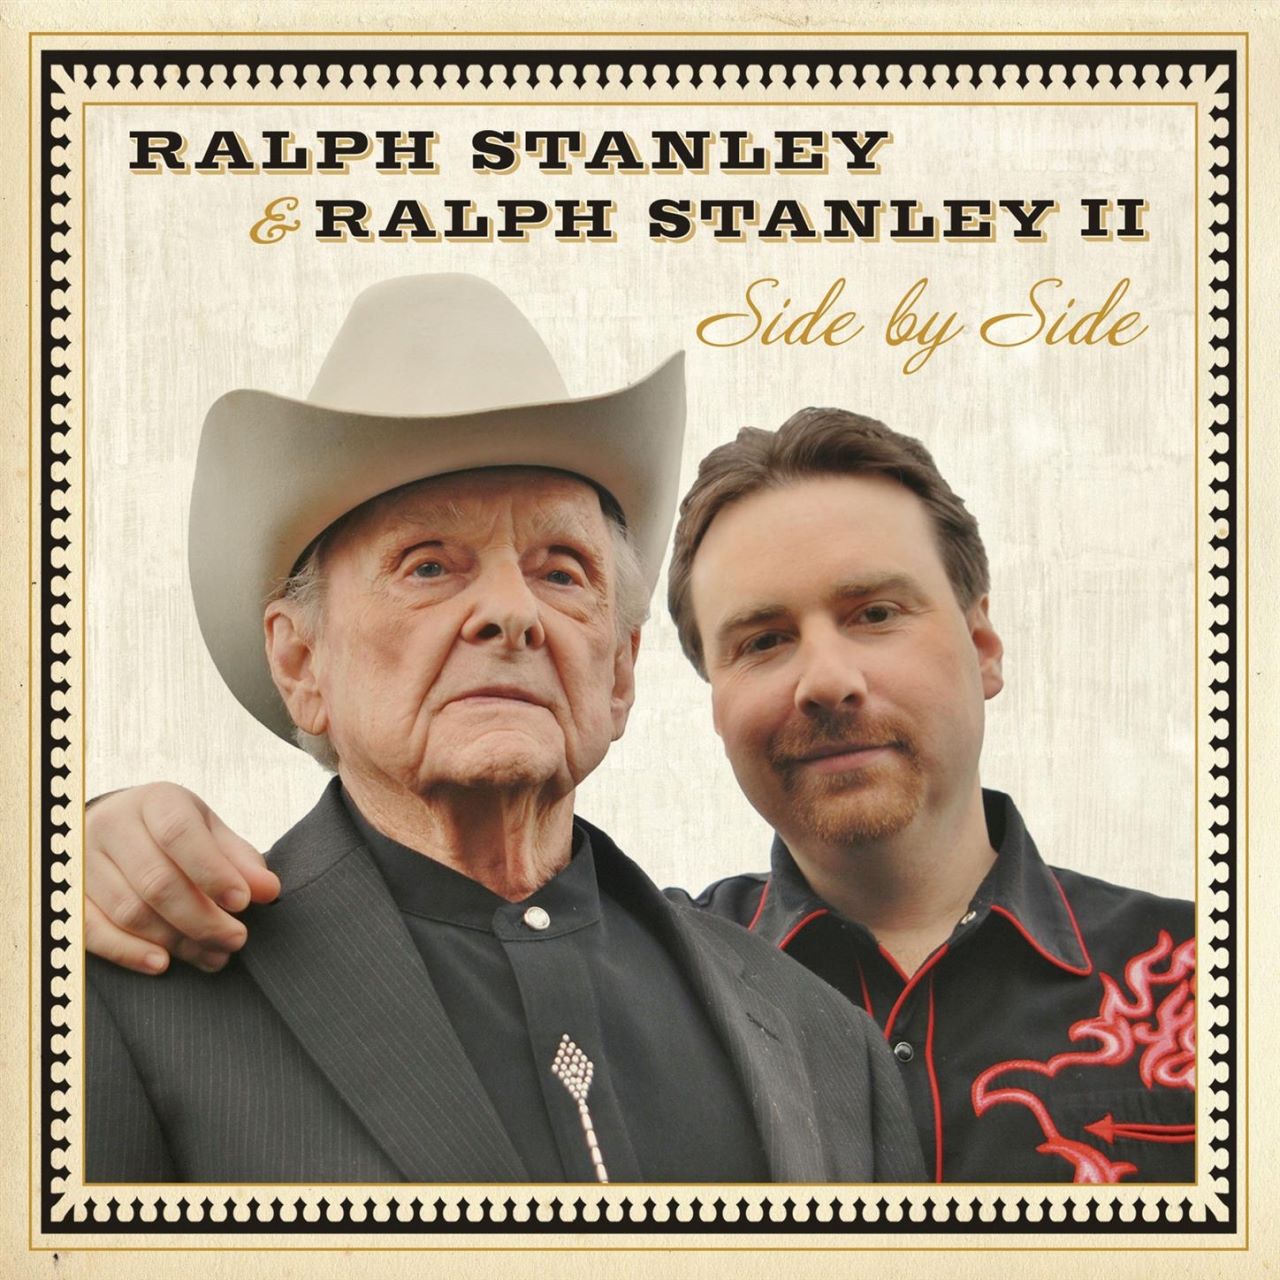 Ralph Stanley & Ralph Stanley II - Side By Side cover album